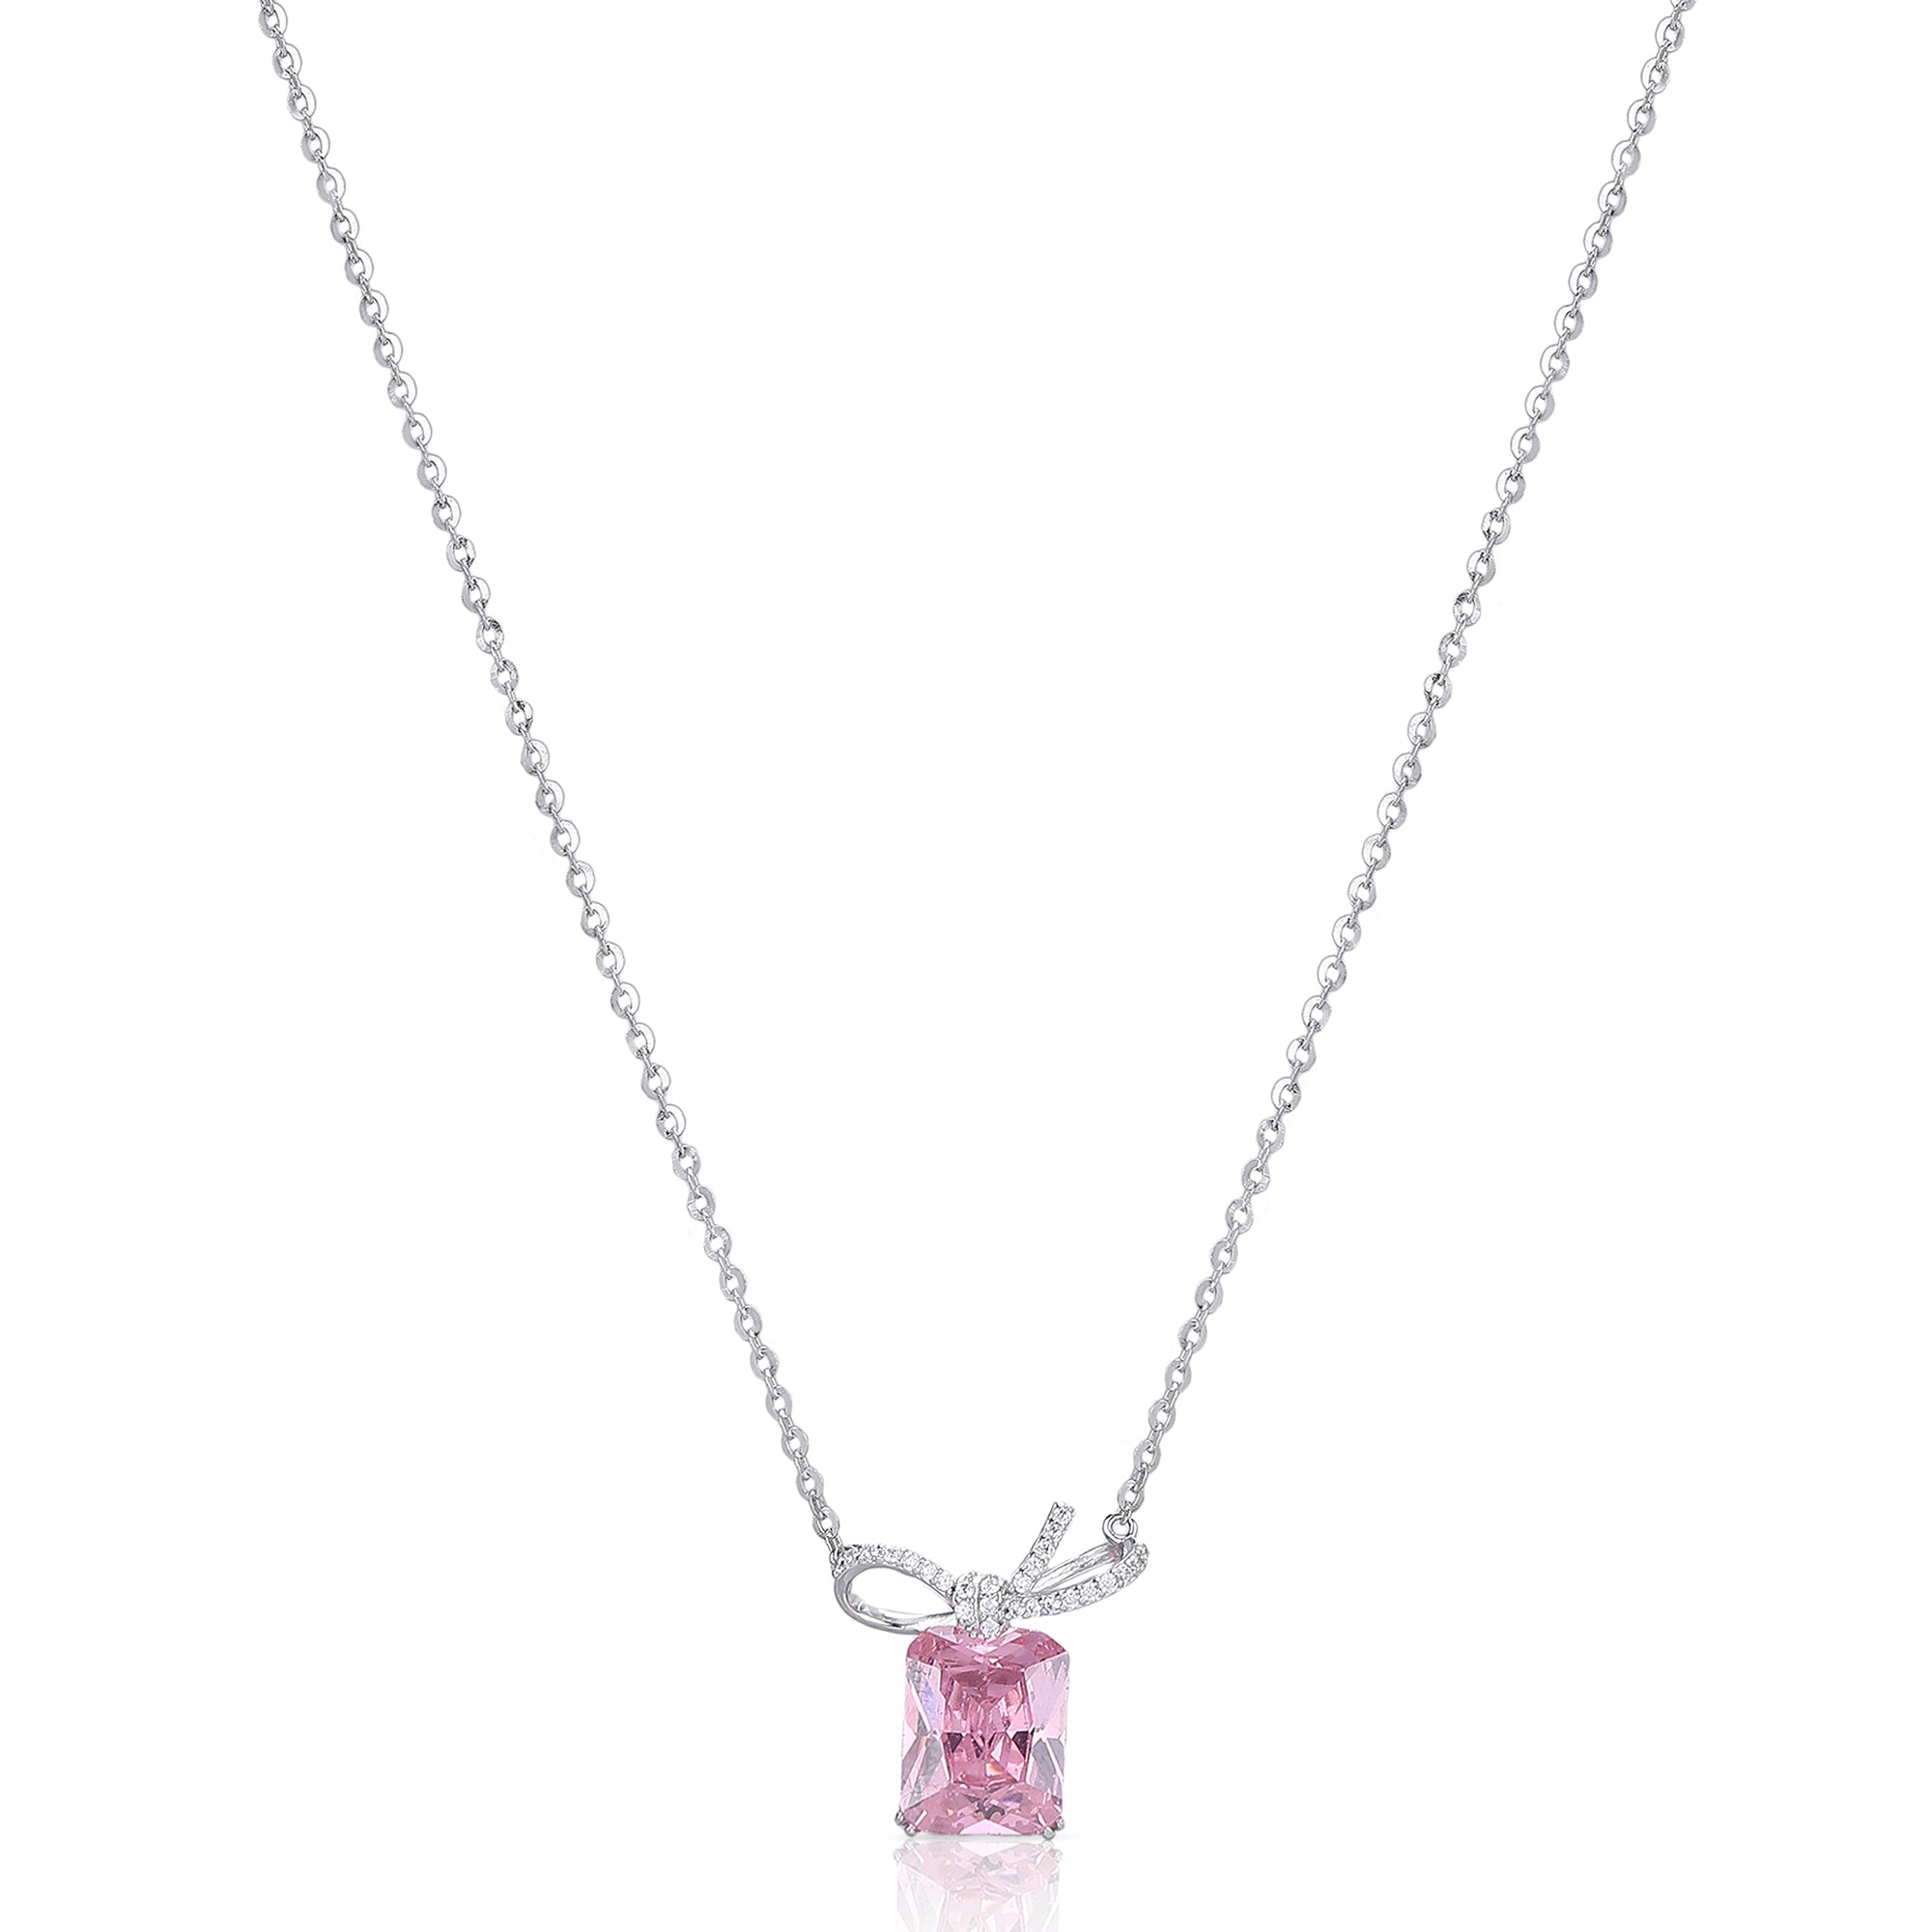 PINK TOURMALINE BOW NECKLACE